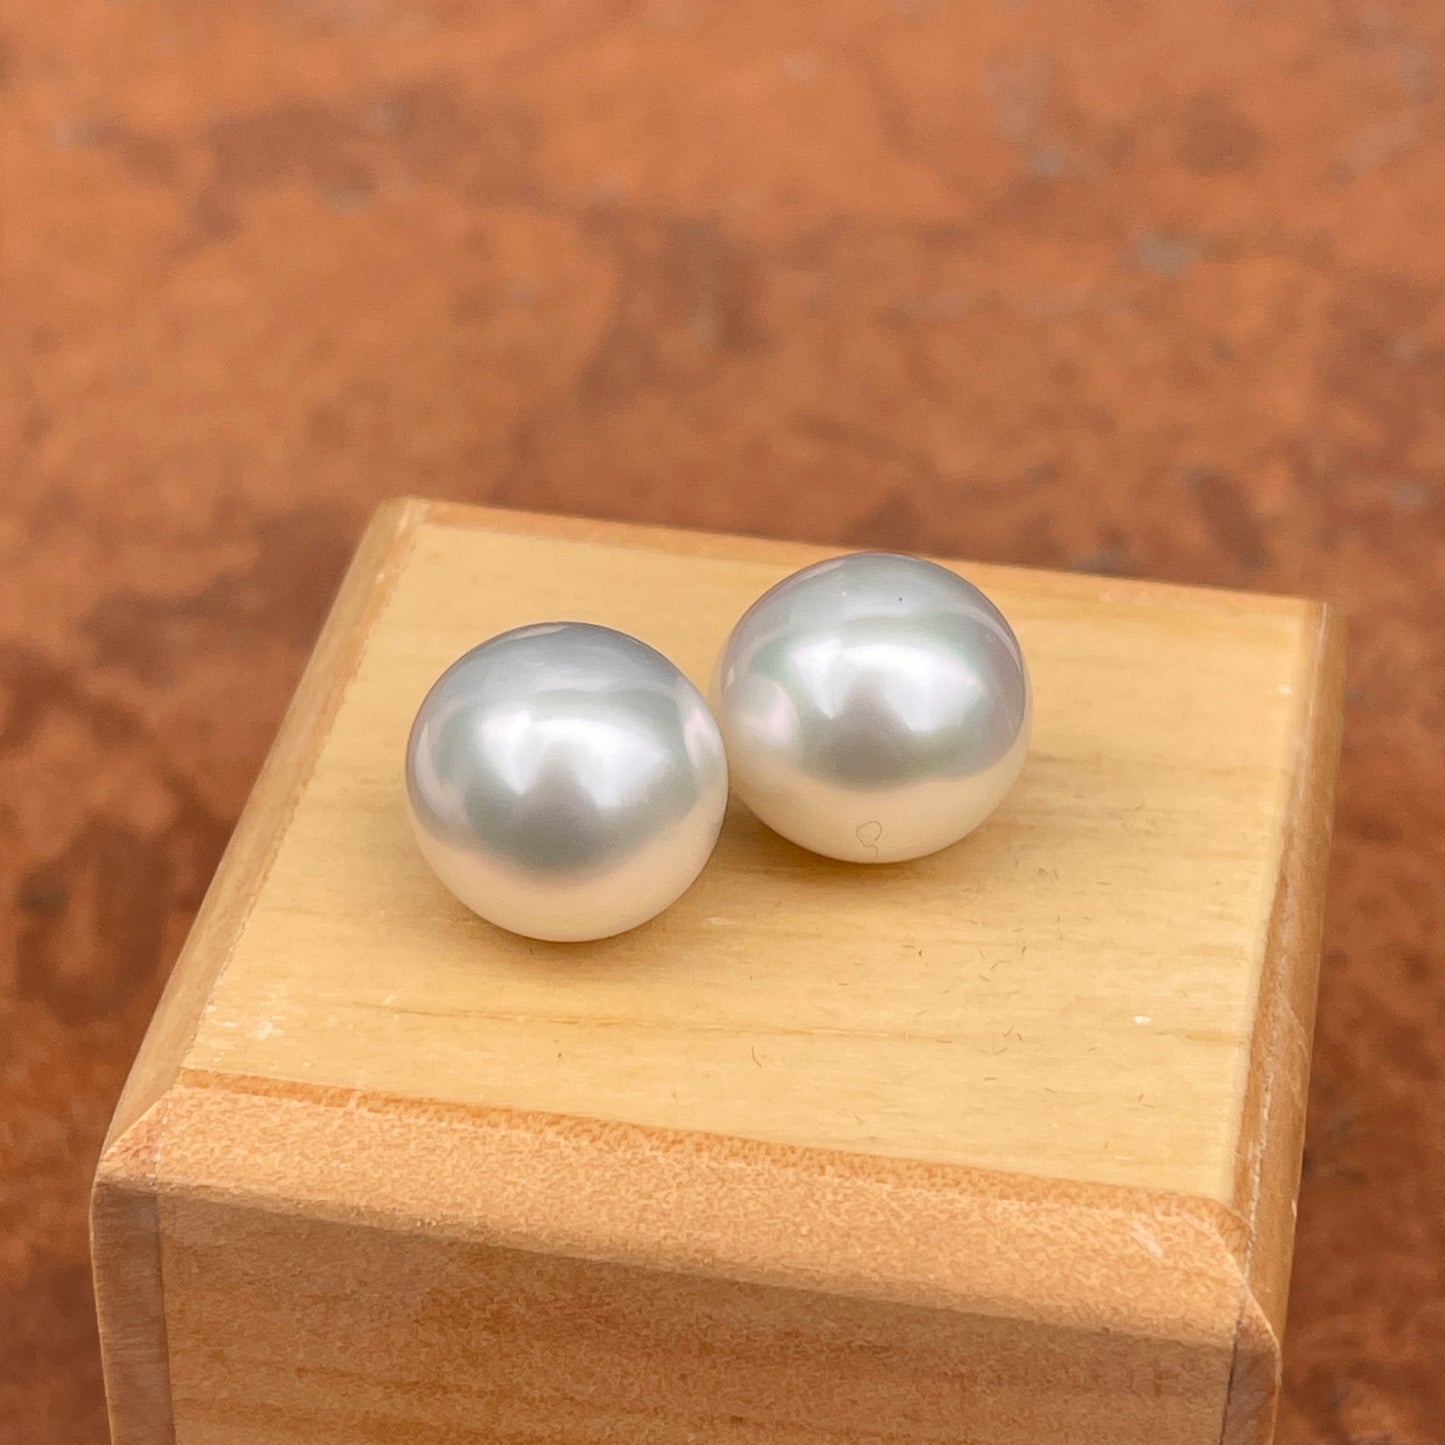 Genuine Paspaley South Sea Loose Pearl Pair "Fine" Quality 12mm